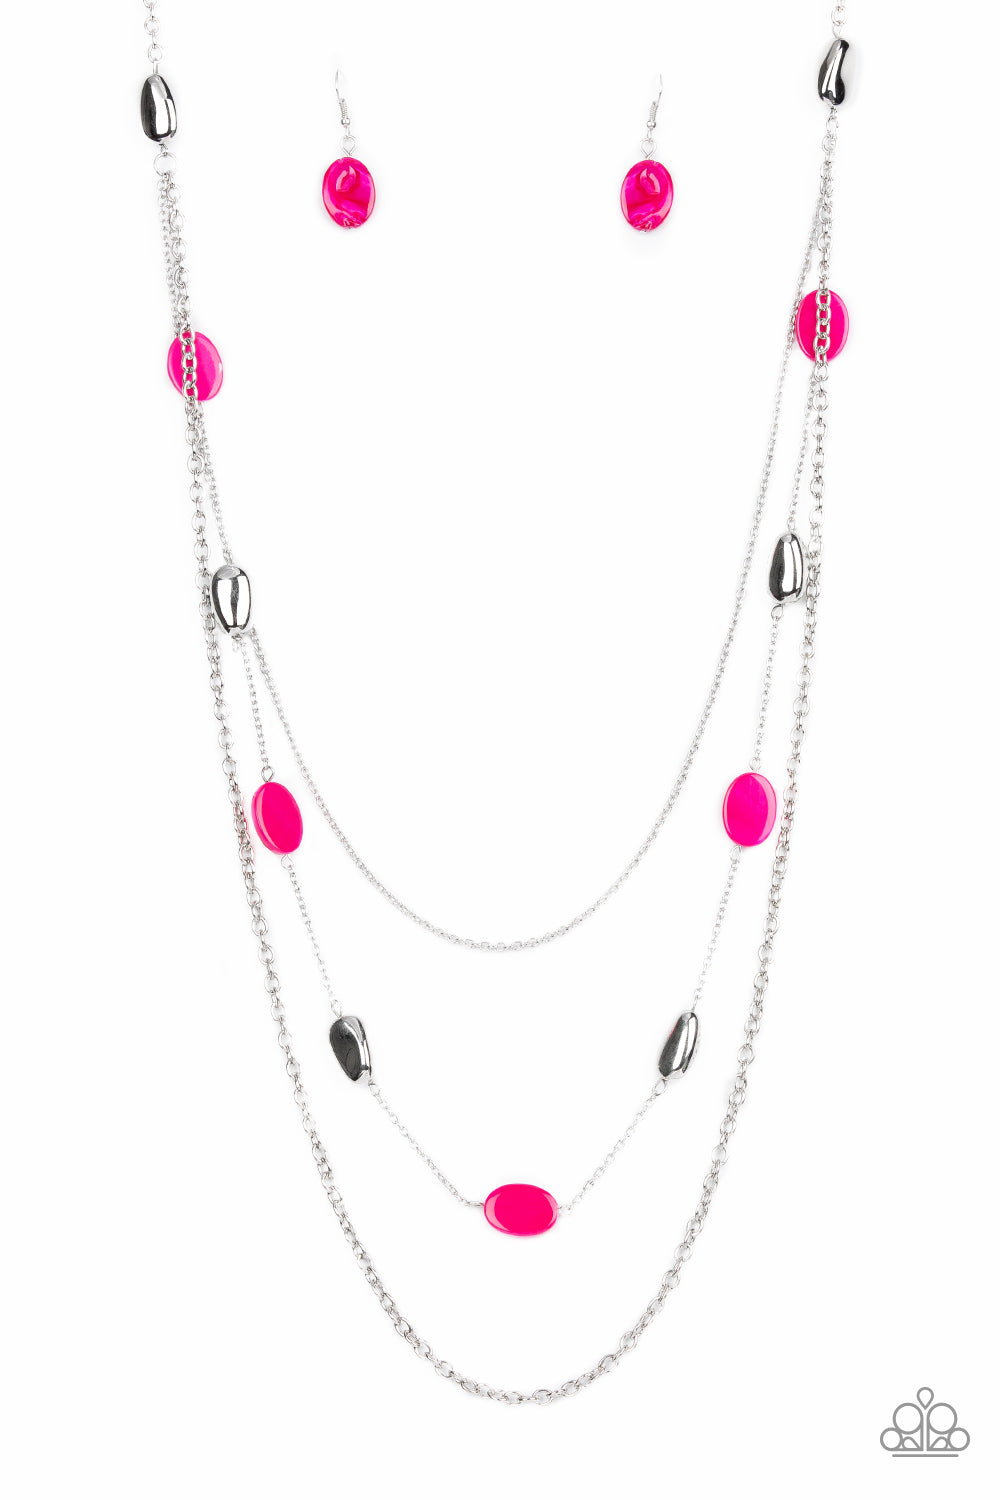 Barefoot and Beachbound - Pink Necklace - Paparazzi Accessories